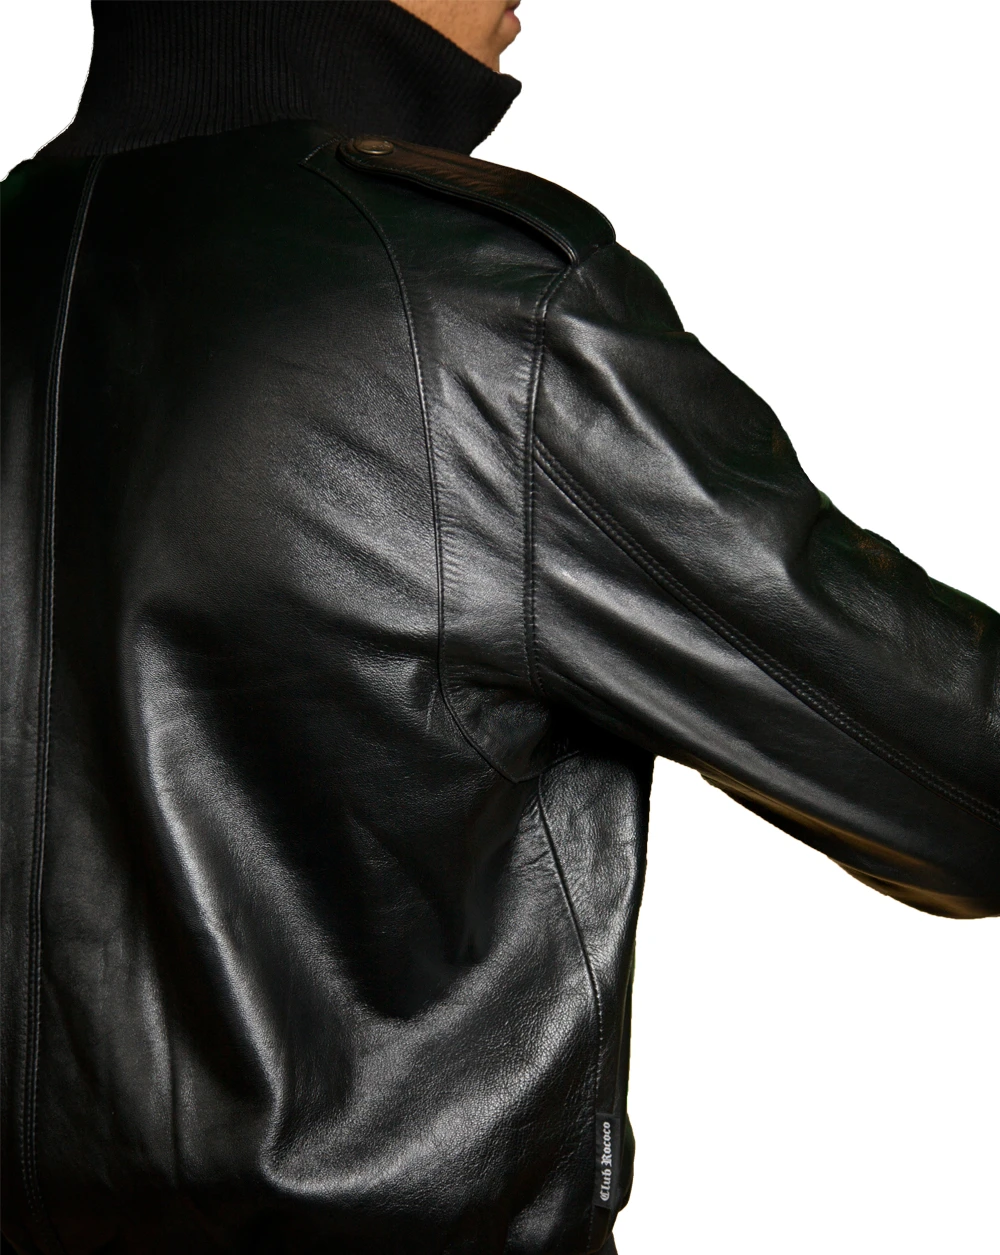 Give your casual looks a smart finish in this leather jacket